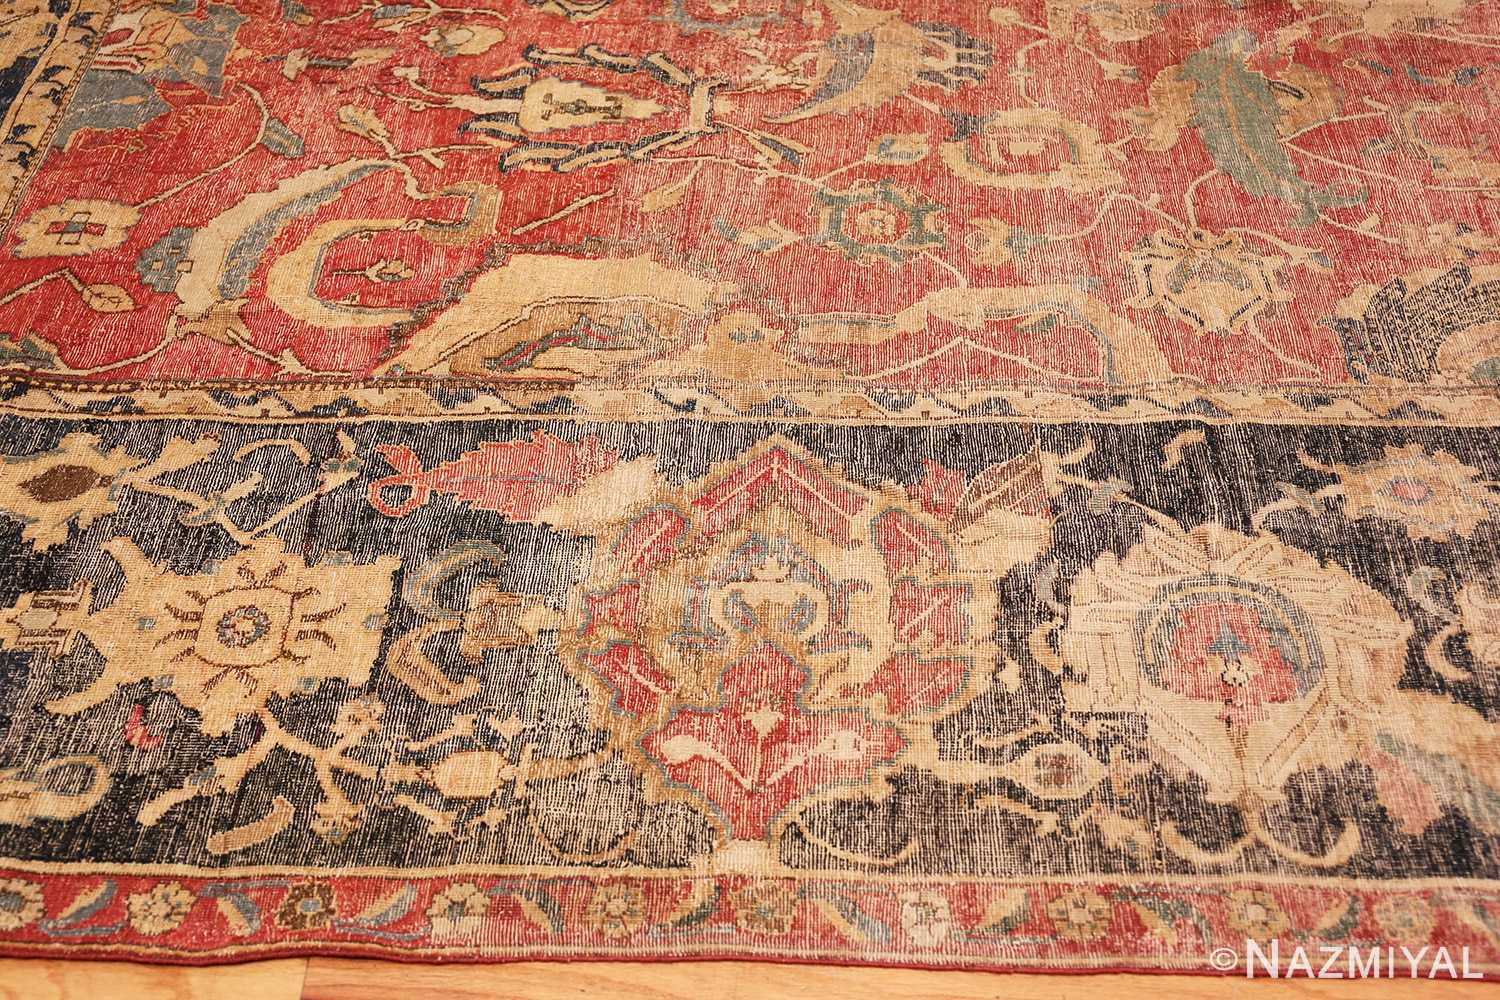 Border Oversized Antique 17th Century Persian Esfahan Oriental rug 44143 by Nazmiyal